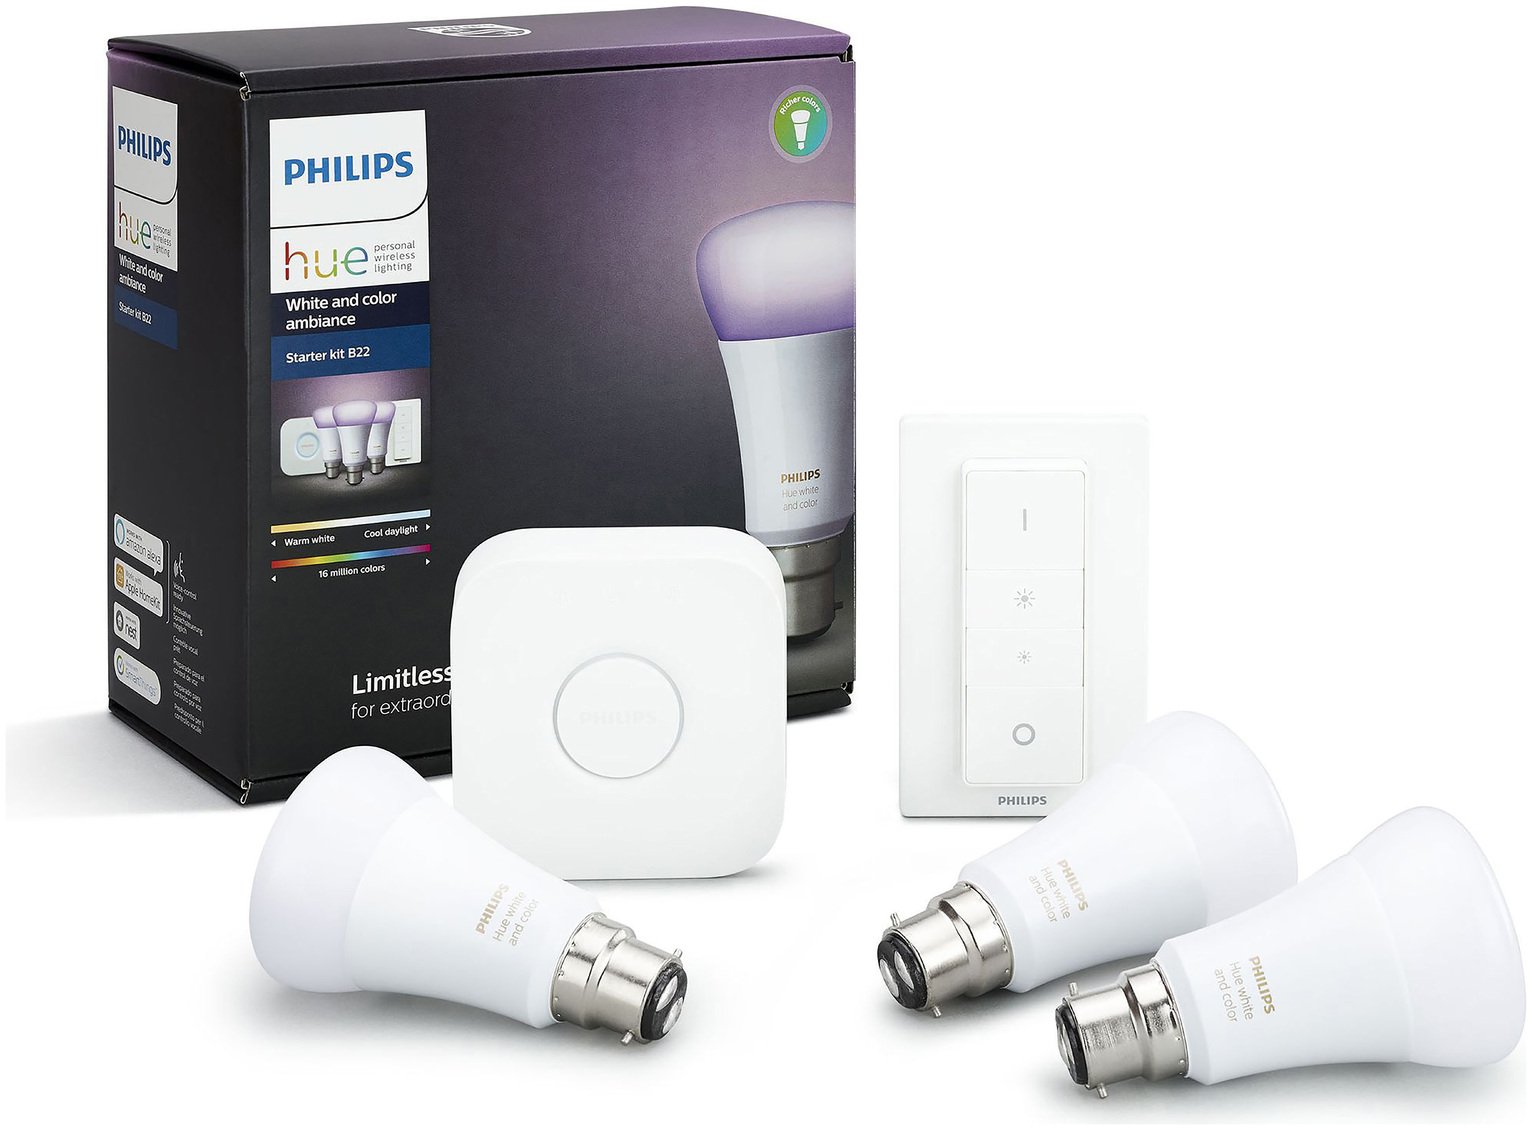 Philips Hue White and Colour Ambience B22 Starter Kit Review